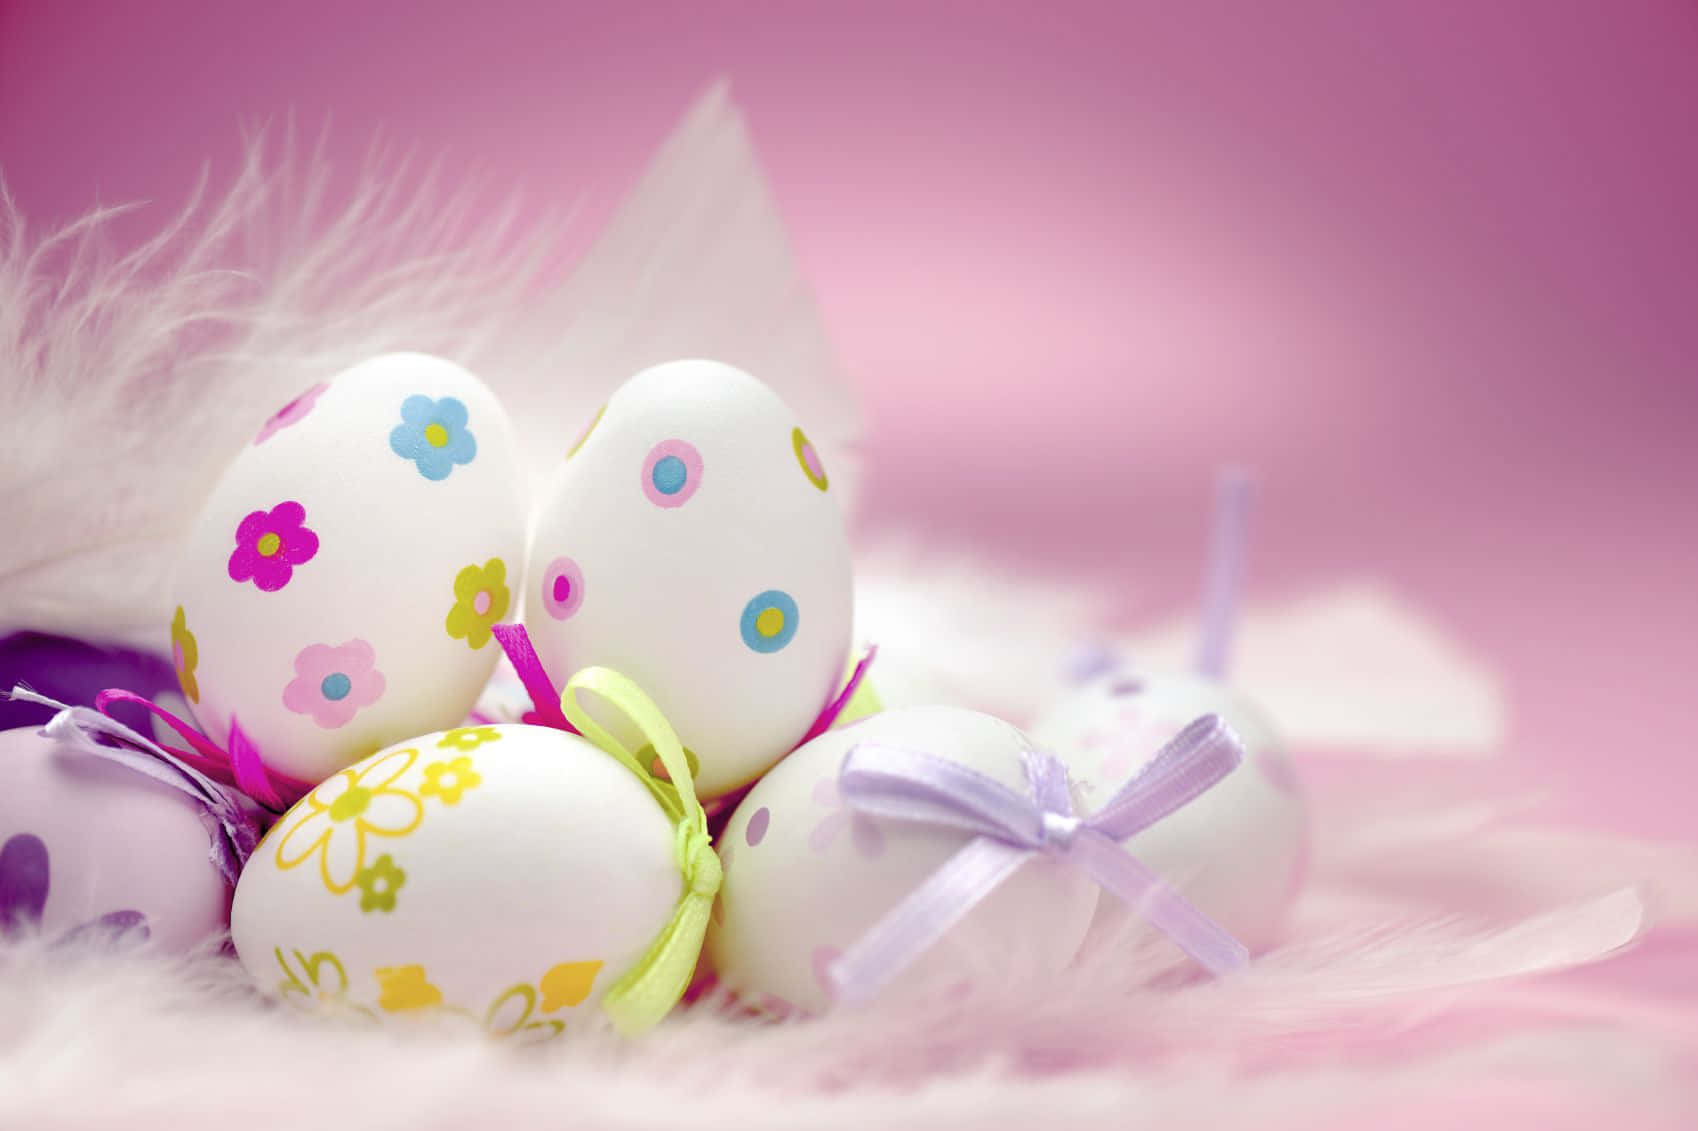 A vibrant Pastel Easter scene with colorful eggs, flowers, butterflies and more.